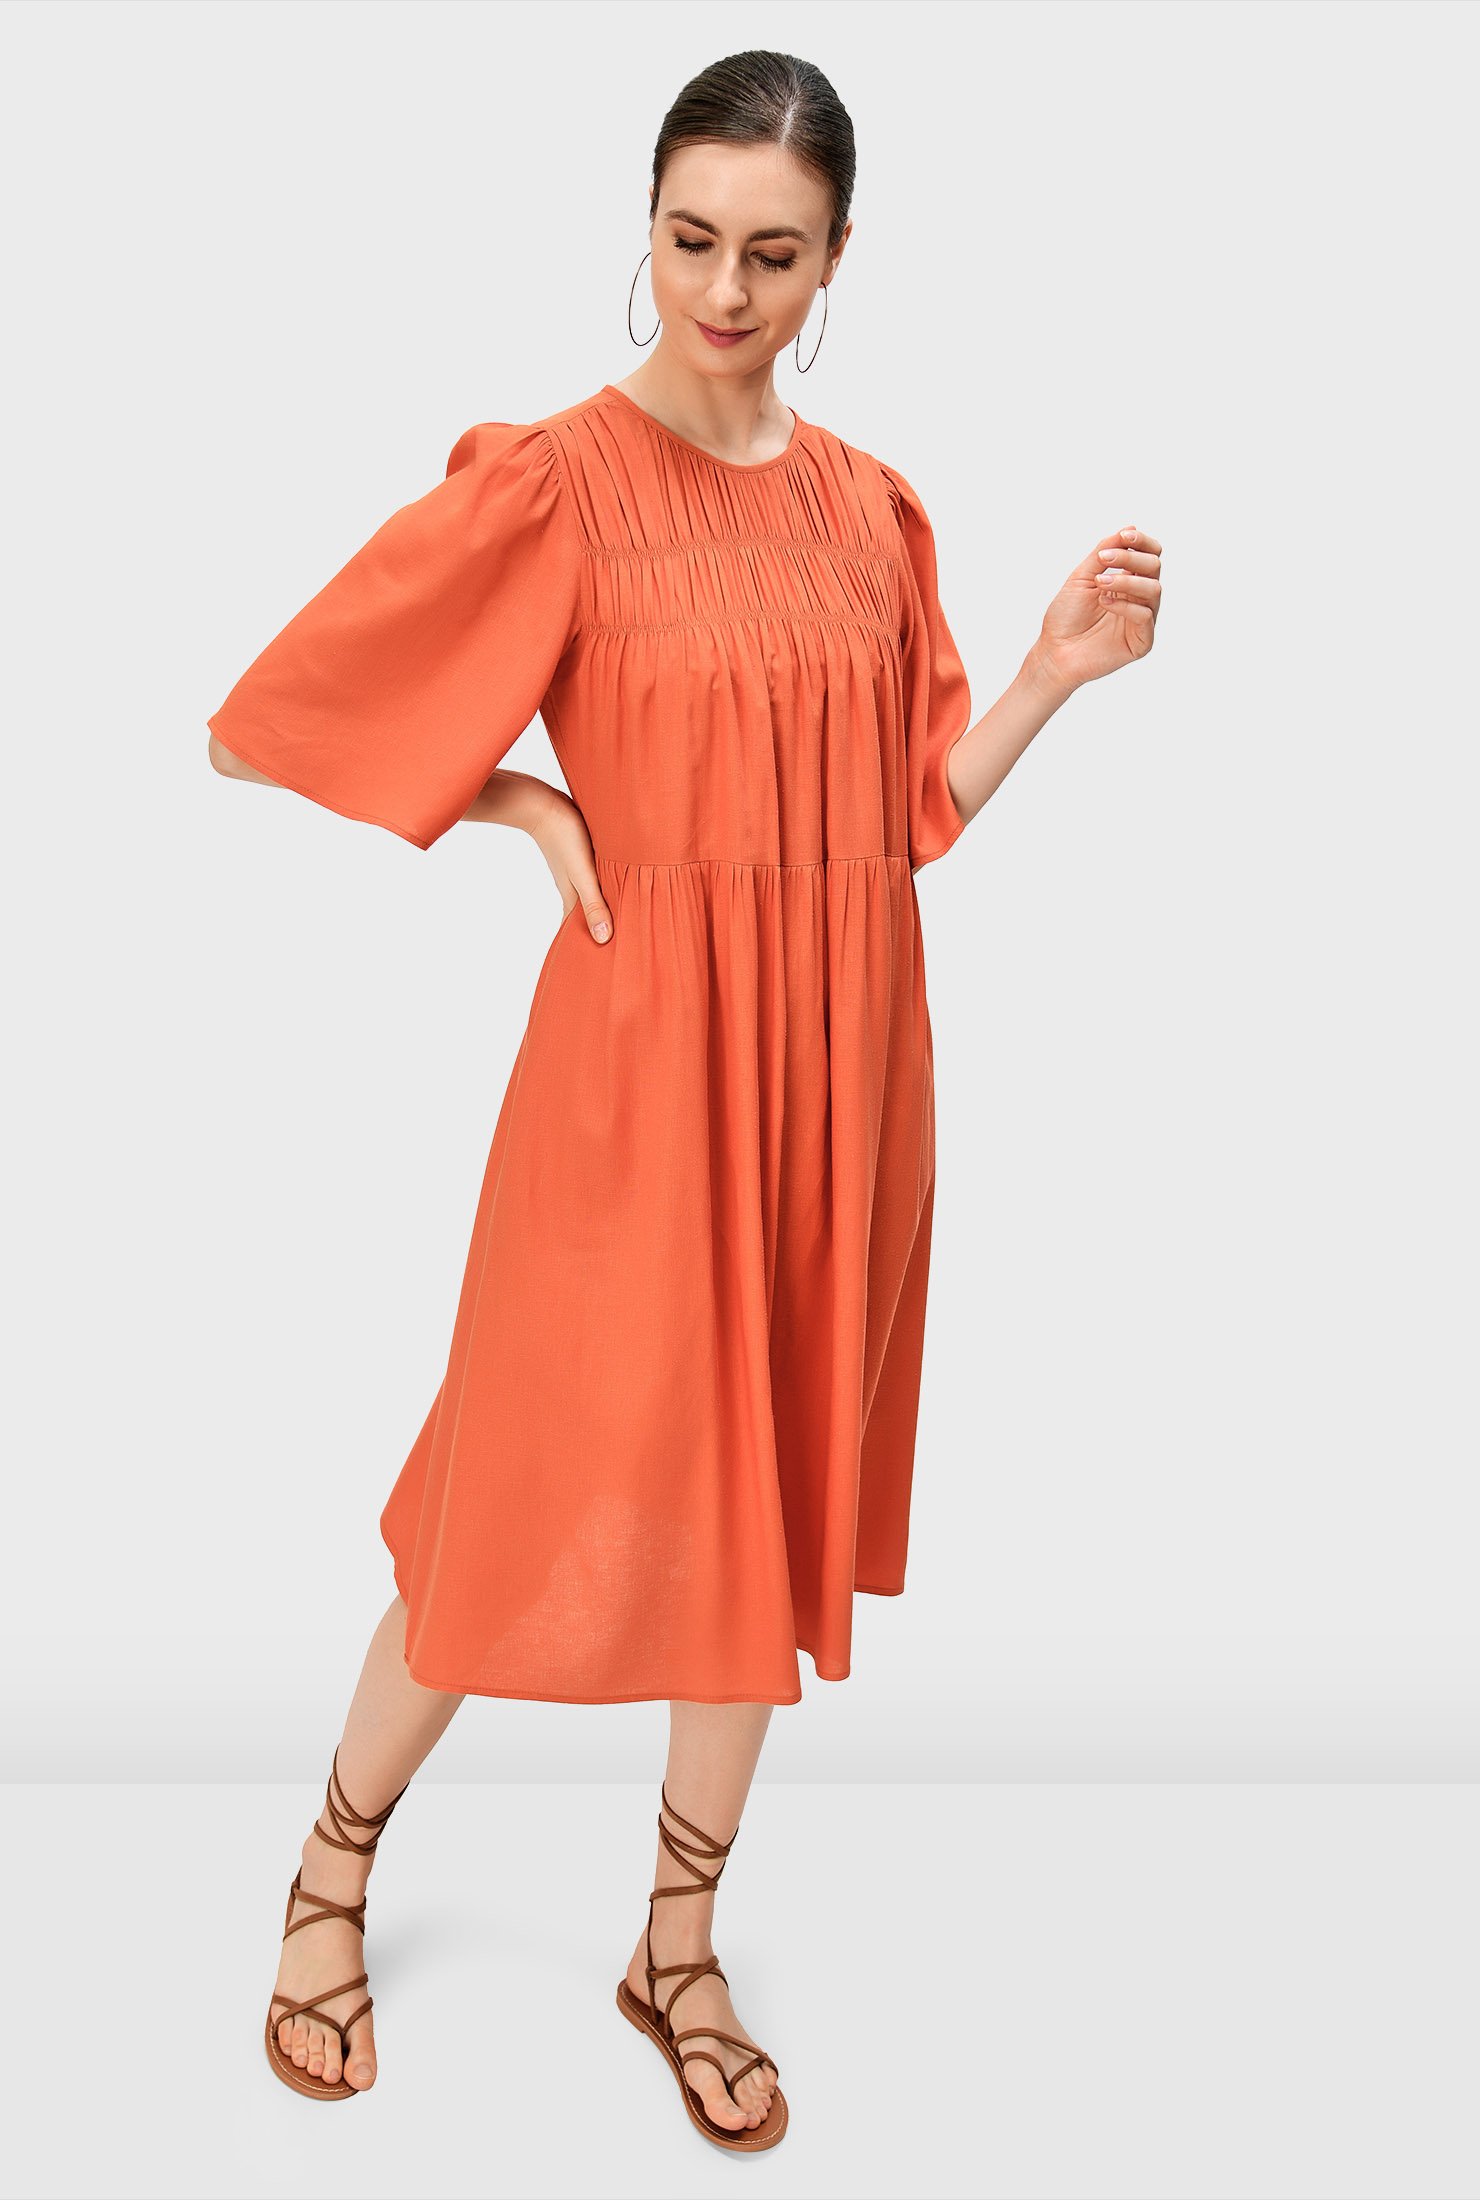 Summertime, and the linen's easy! Our flared swing style linen modal shift dress is shirred at the elasticated front yoke and at the full skirt, a definition of effortless style.